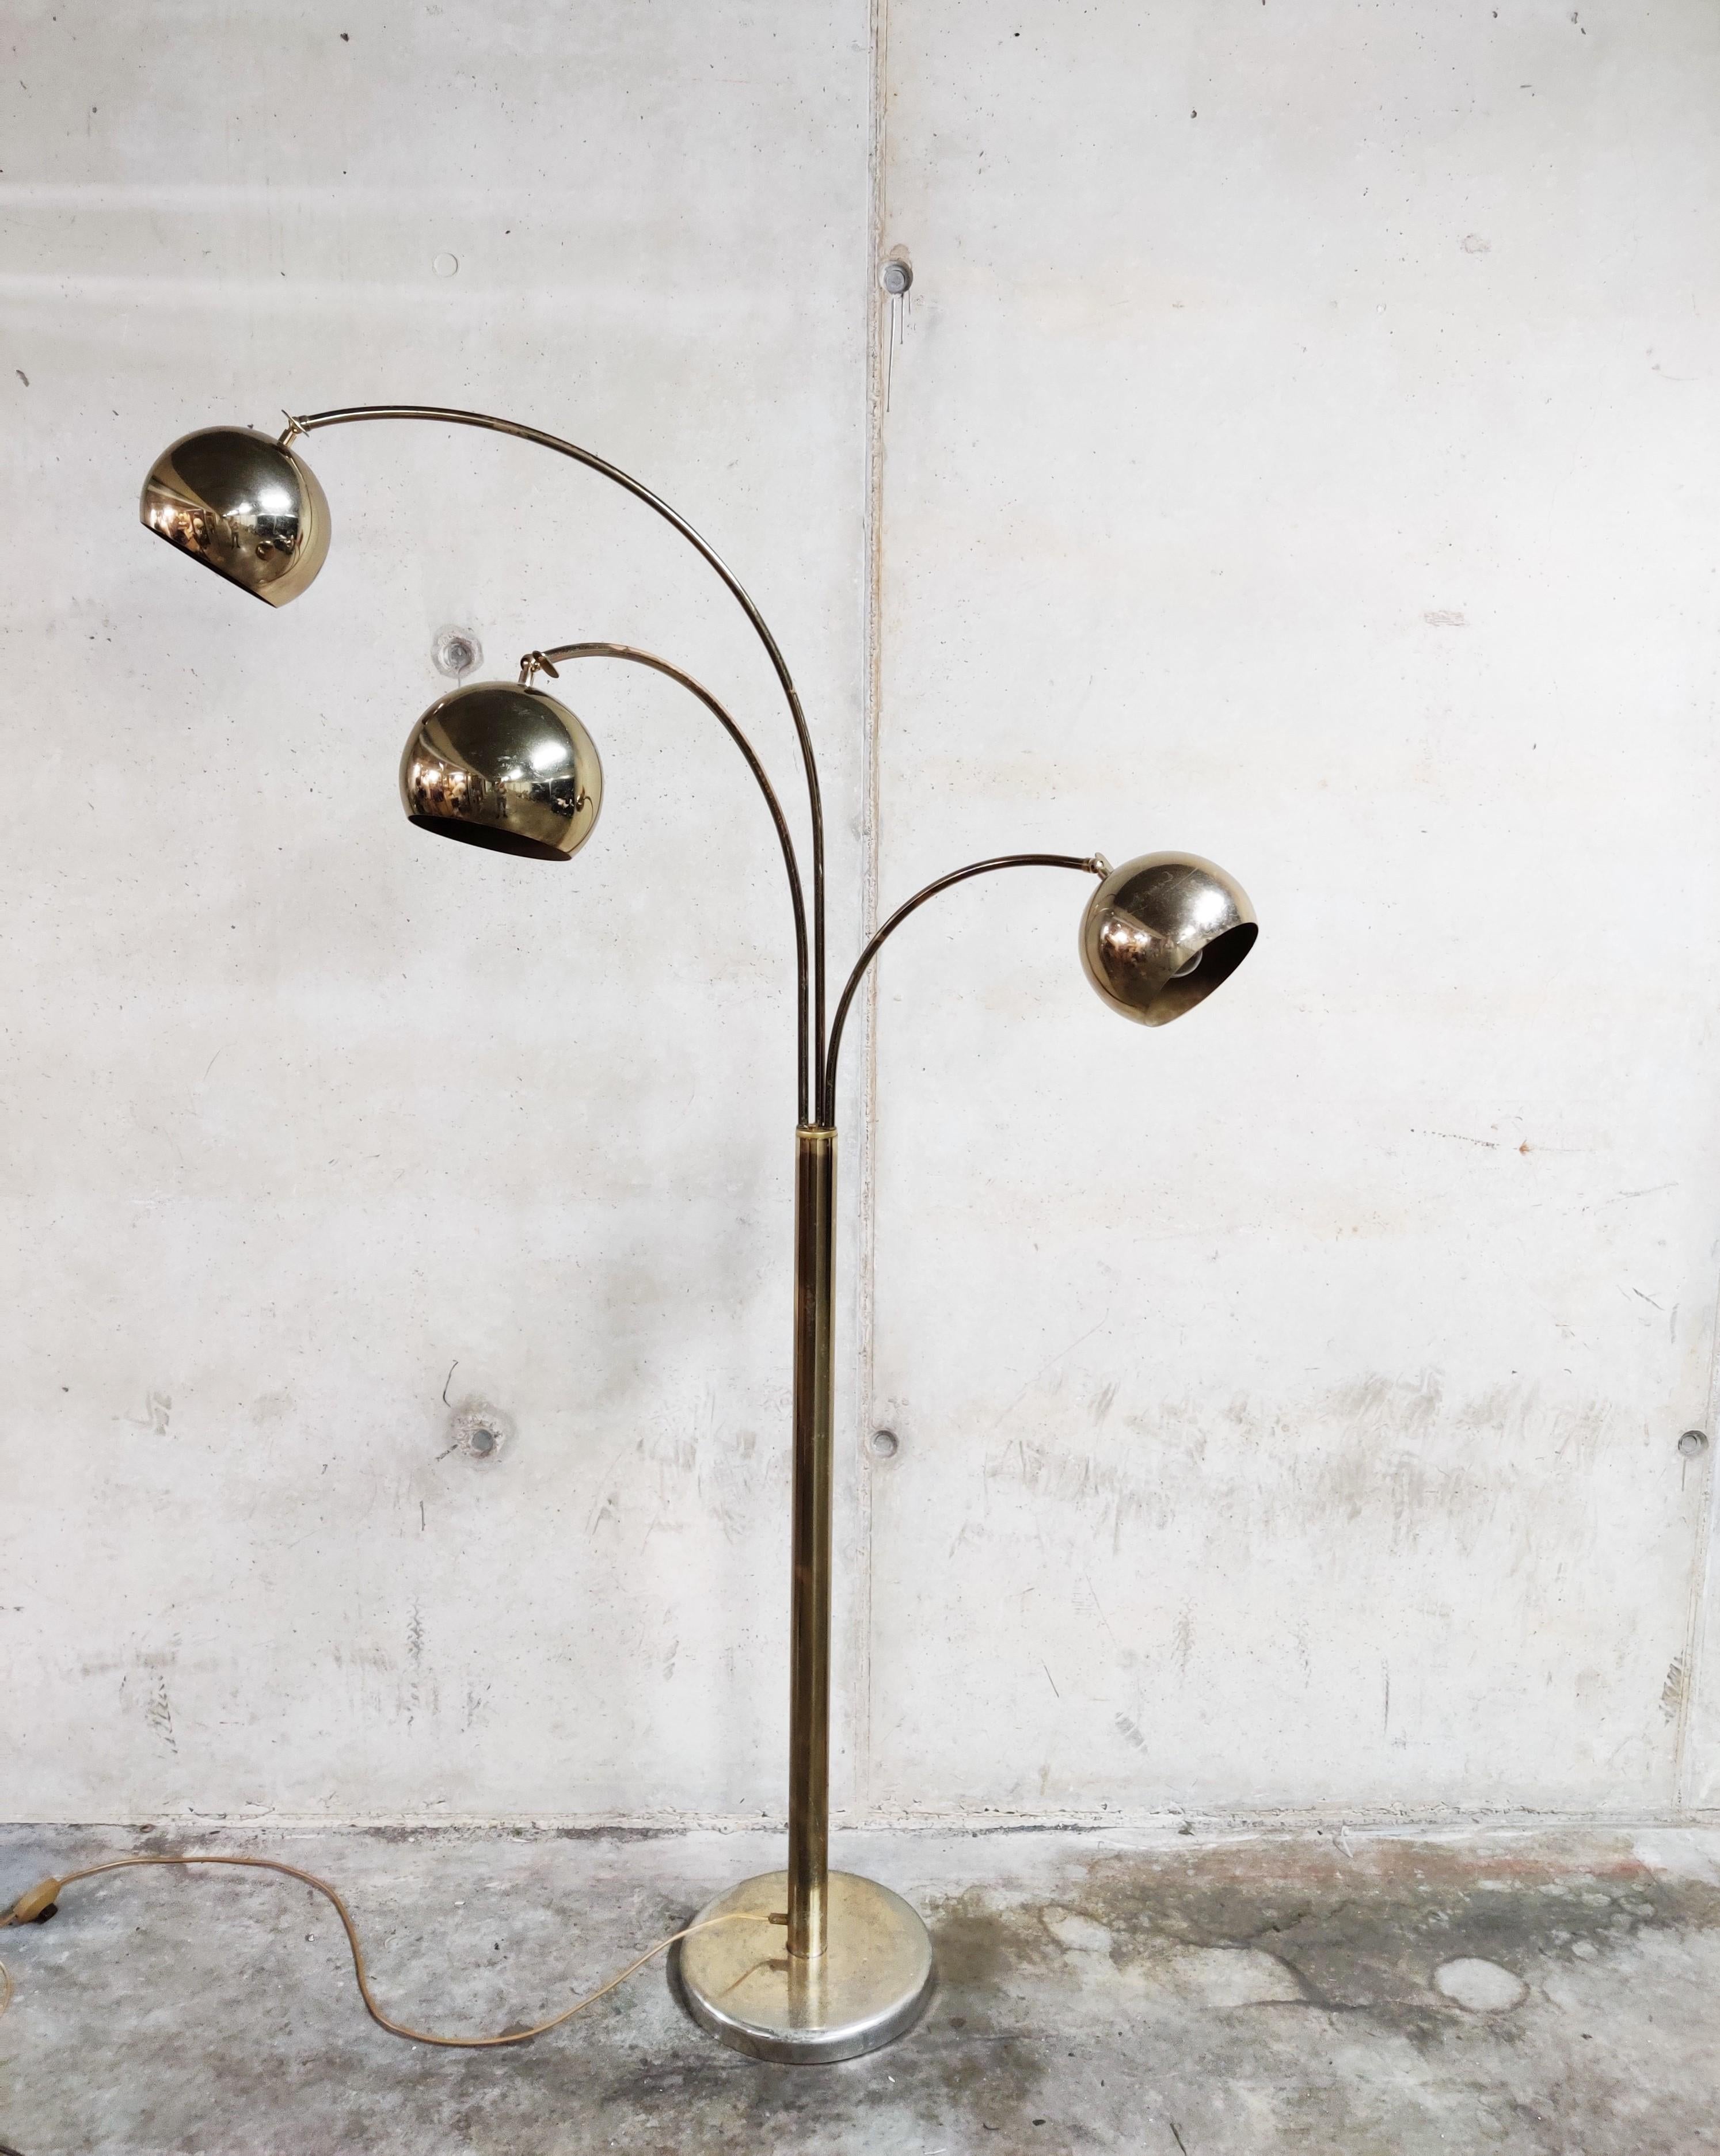 Vintage brass three lightpoint 'arc' floor lamp.

The brass globes are articulated and the arms of the lamp can be moved in order to position the lightpoints as desired.

The lamp has age wear and patina on the arms and base, but still look